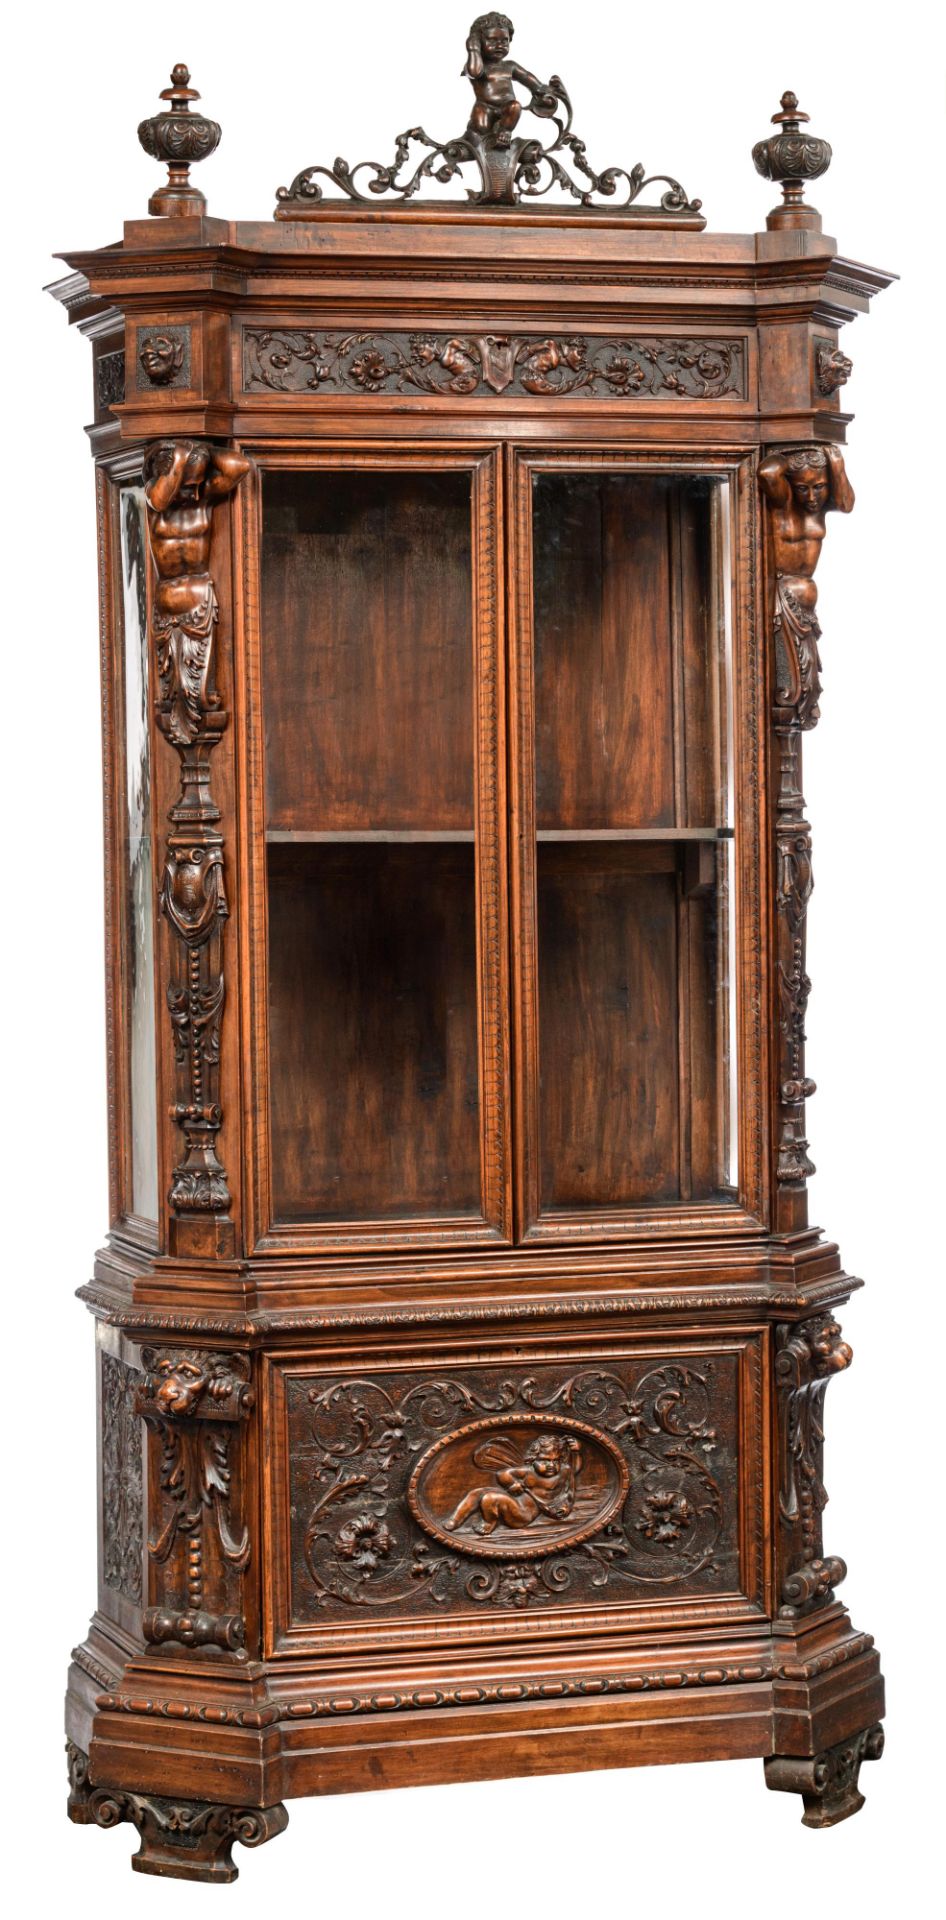 A richly sculpted walnut Renaissance style display cabinet, decorated with scrollwork, lion heads an